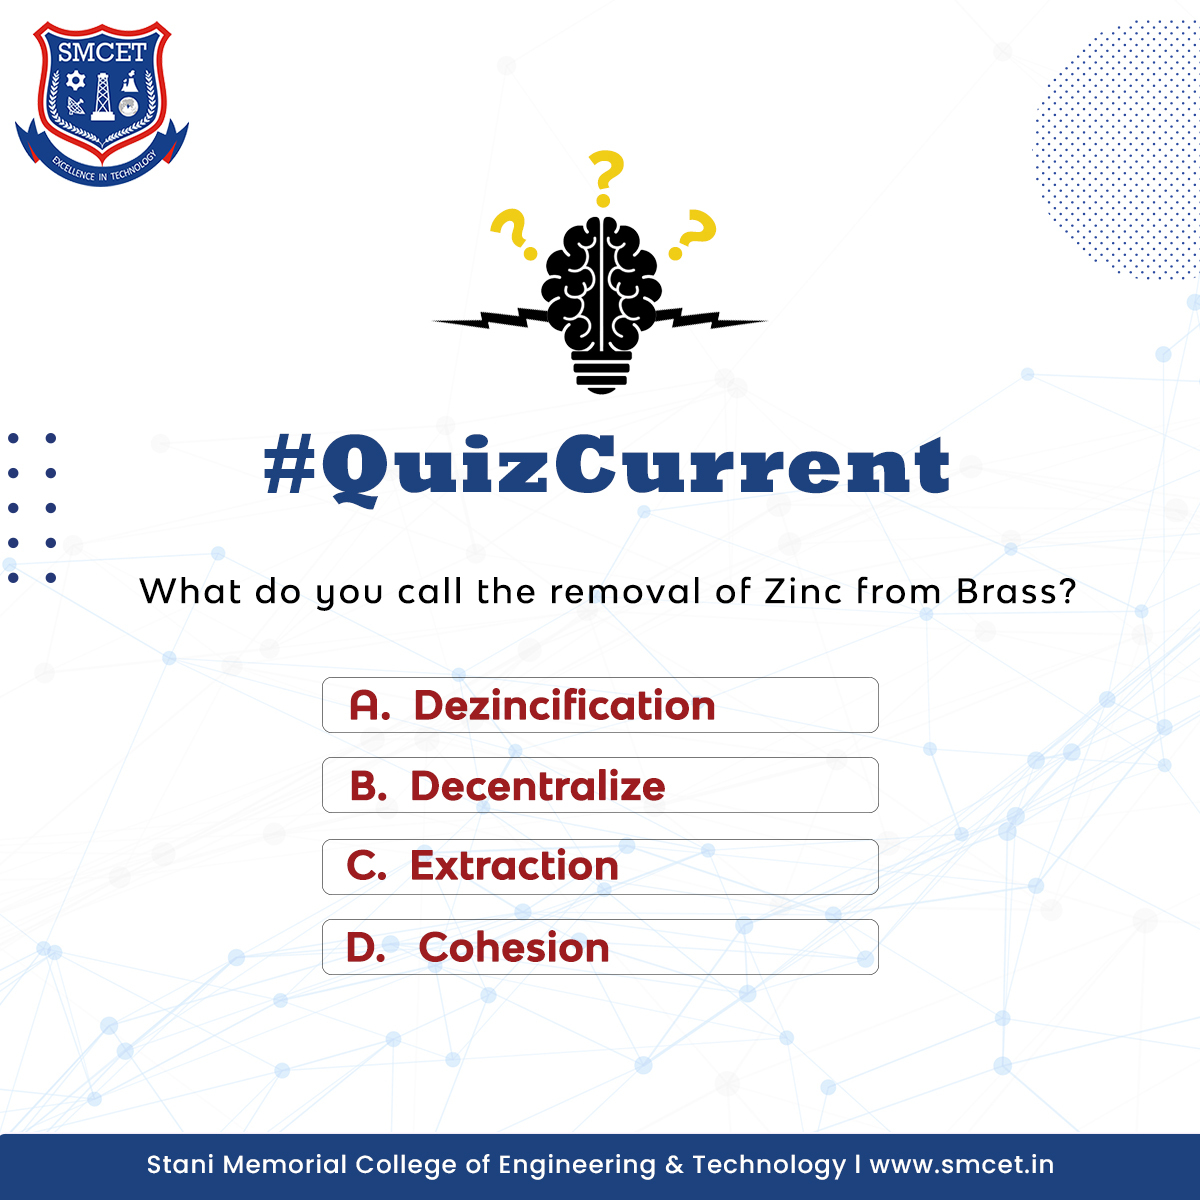 Smcet Jaipur On Twitter Take This Quiz To Find Out How Good An Engineer You Are Quiz Smcet Quiz Quizinstagram Quiztime Knowledge Testyourknowledge Trivia Fun Education Questions Engineerquiz Enginneringlife Collegeinjaipur